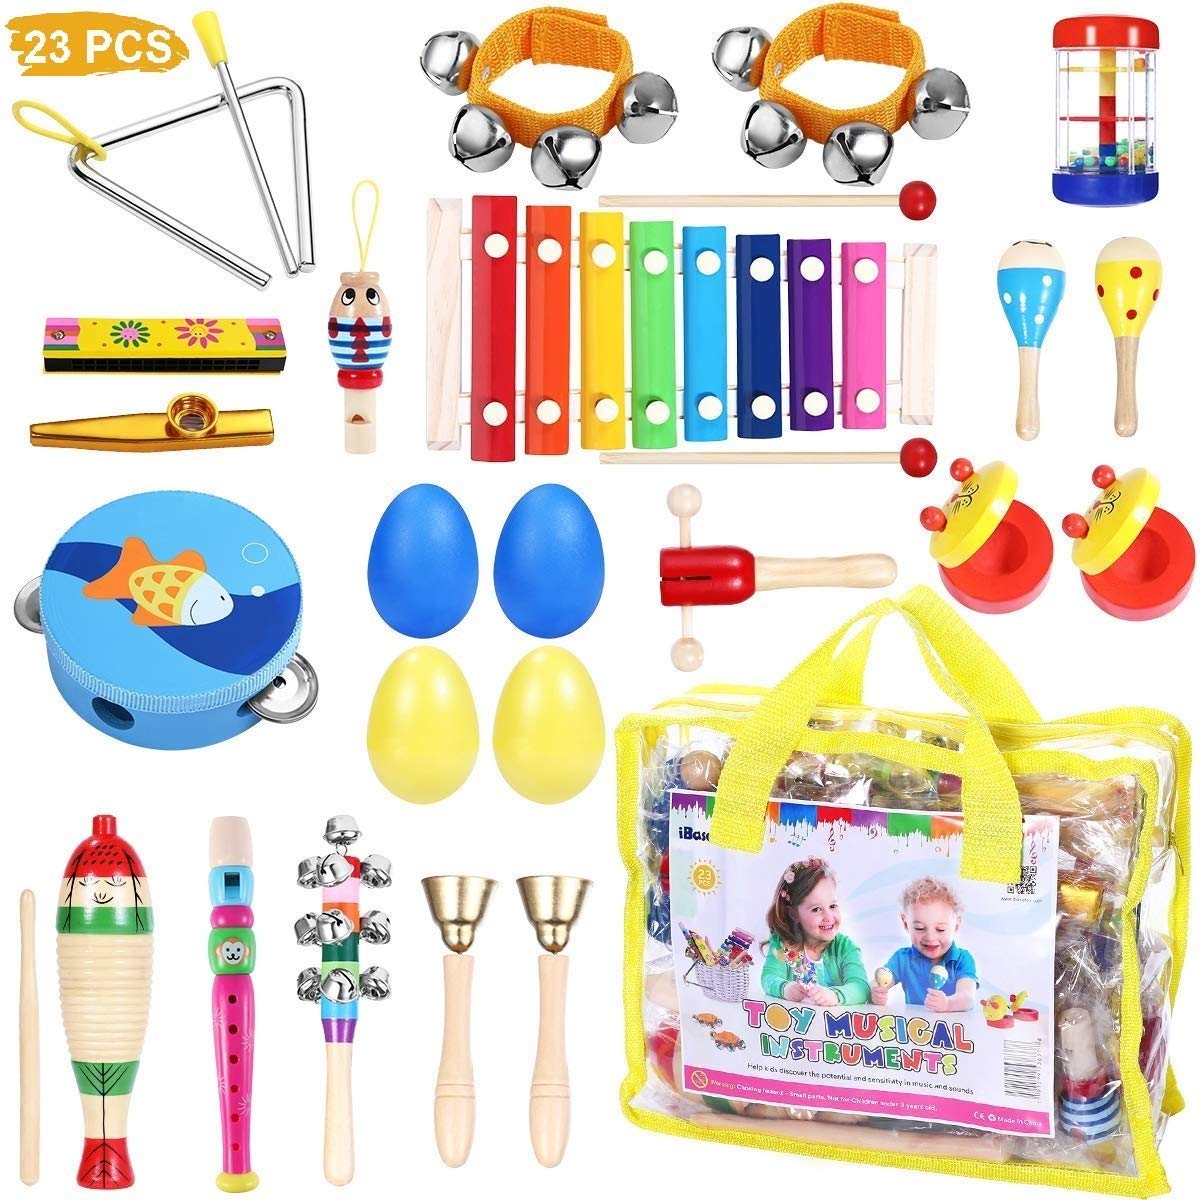 Toddler Musical Instruments - iBaseToy 23Pcs 16Types Wooden Percussion Instruments Tambourine Xylophone Toys for Kids 